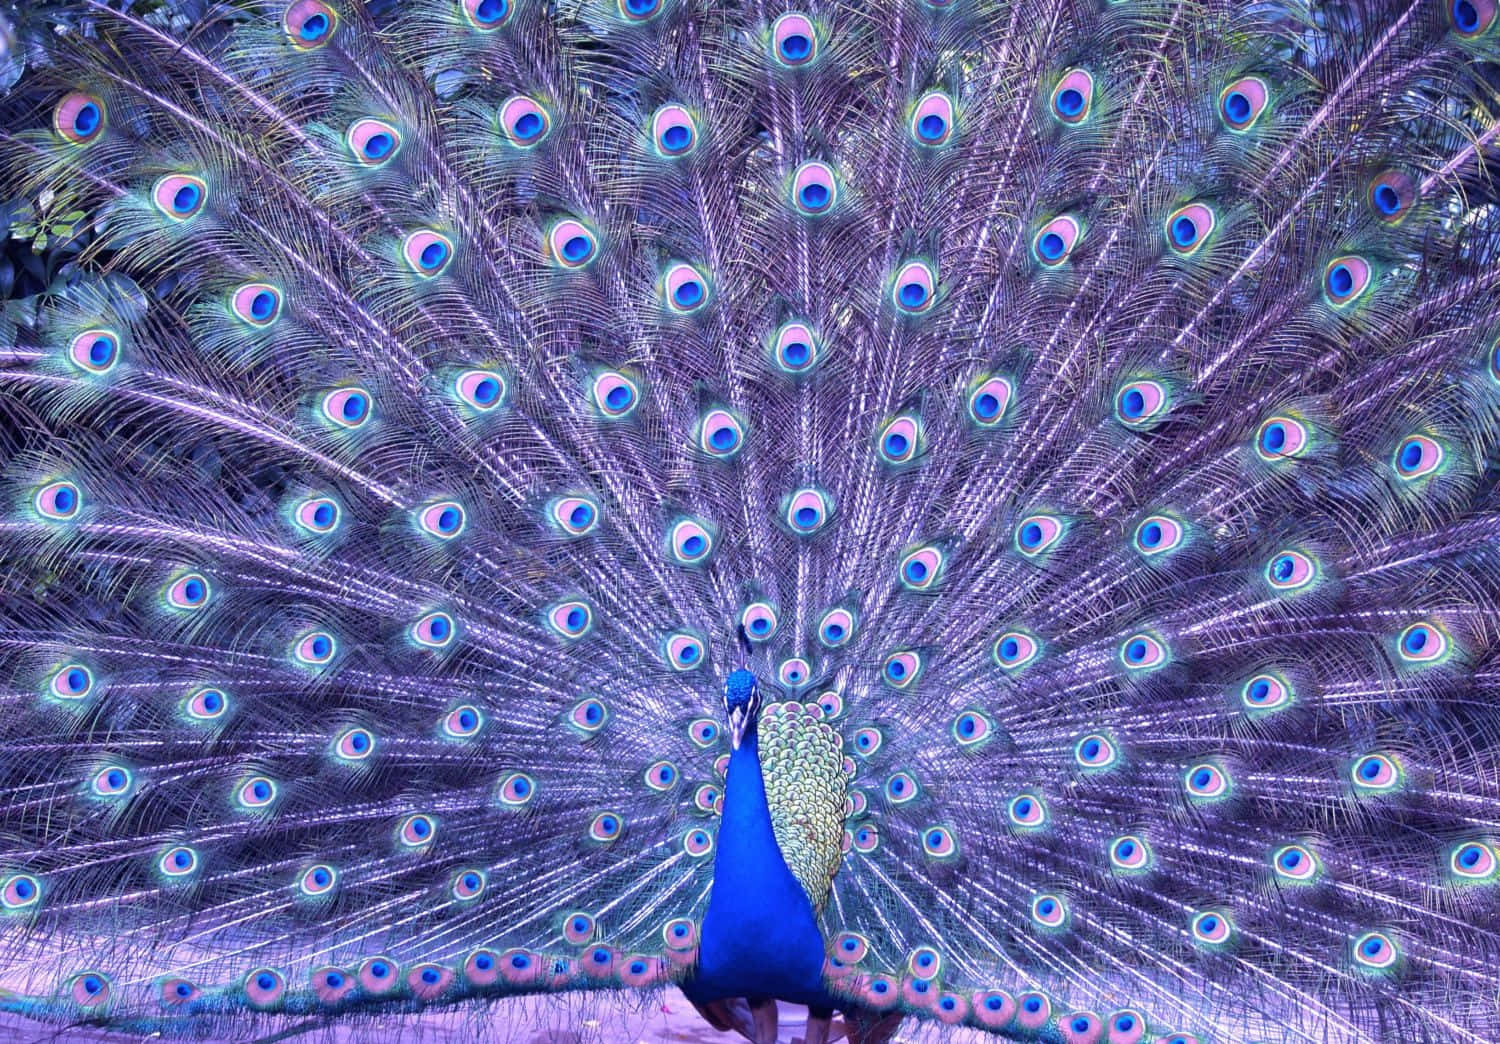 A Peacock Is Displaying Its Feathers In The Forest